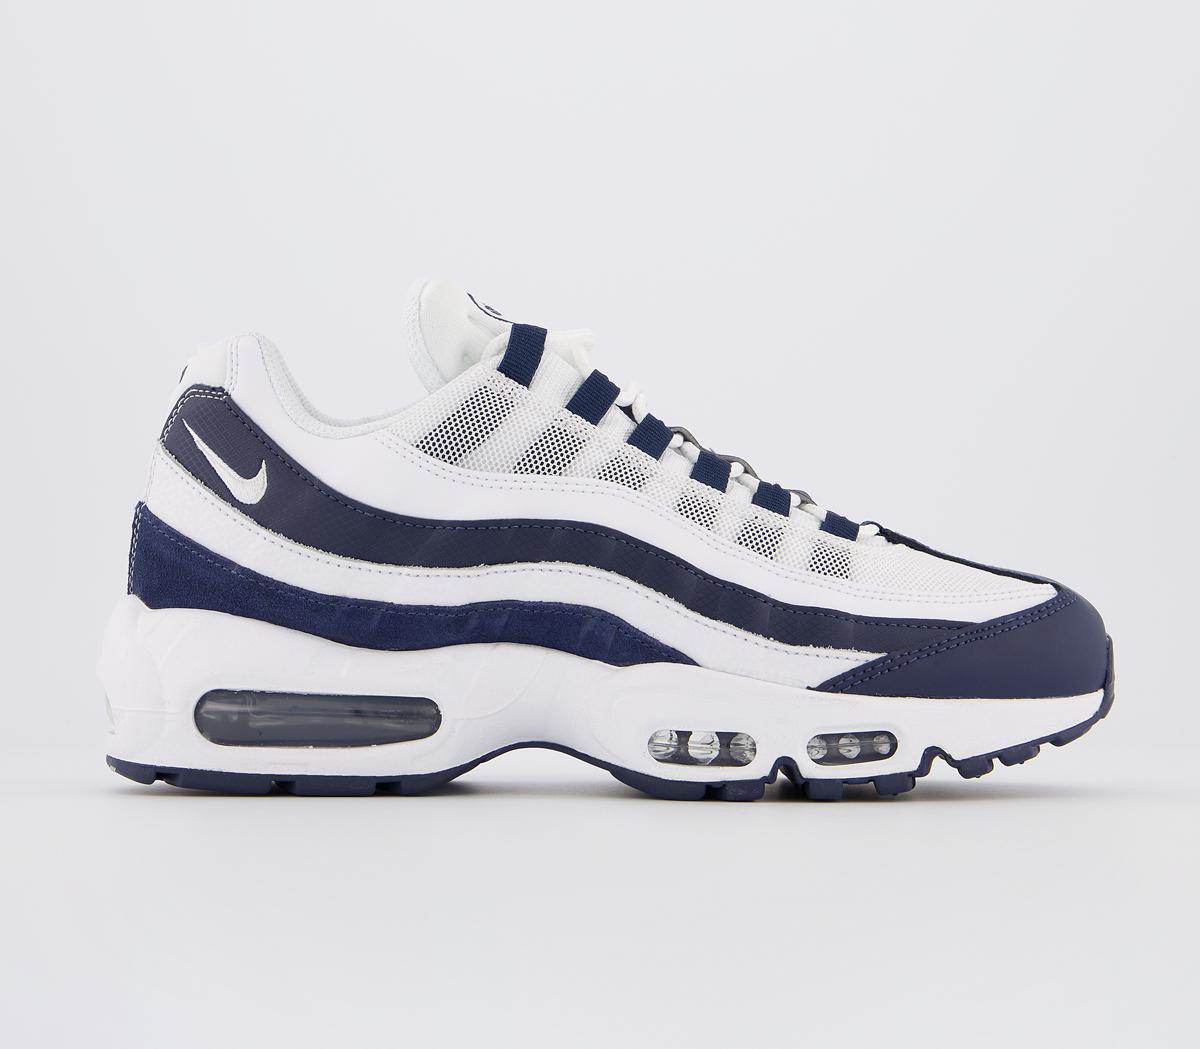 Nike Air Max 95 Trainers Midnight Navy 